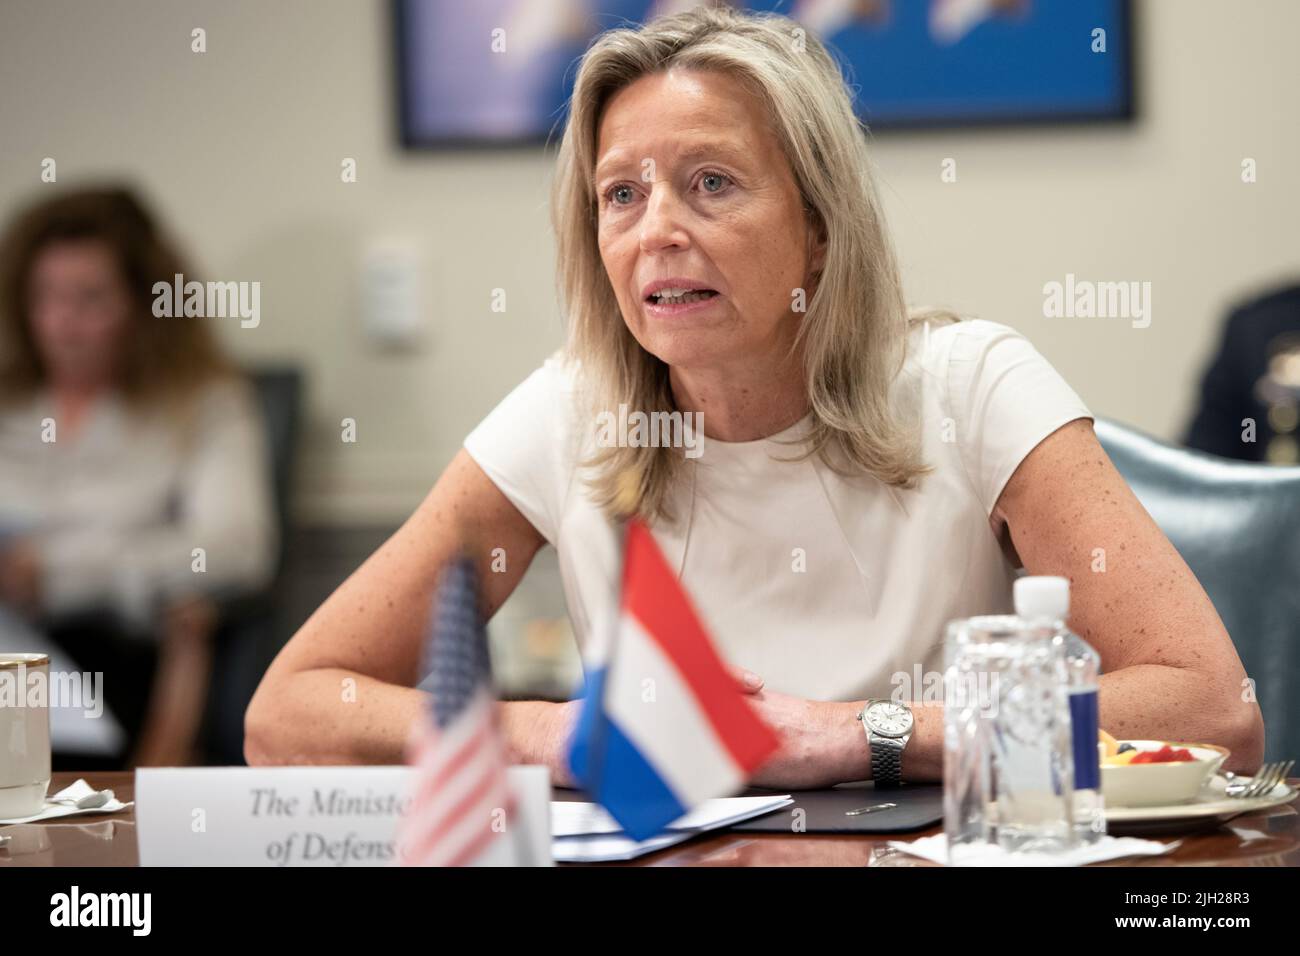 Arlington, United States Of America. 13th July, 2022. Arlington, United States of America. 13 July, 2022. Dutch Defense Minister Kajsa Ollongren delivers remarks during a face-to-face bilateral meeting with U.S. Secretary of Defense Lloyd J. Austin III, at the Pentagon, July 13, 2022 in Arlington, Virginia. Credit: Lisa Ferdinando/DOD/Alamy Live News Stock Photo